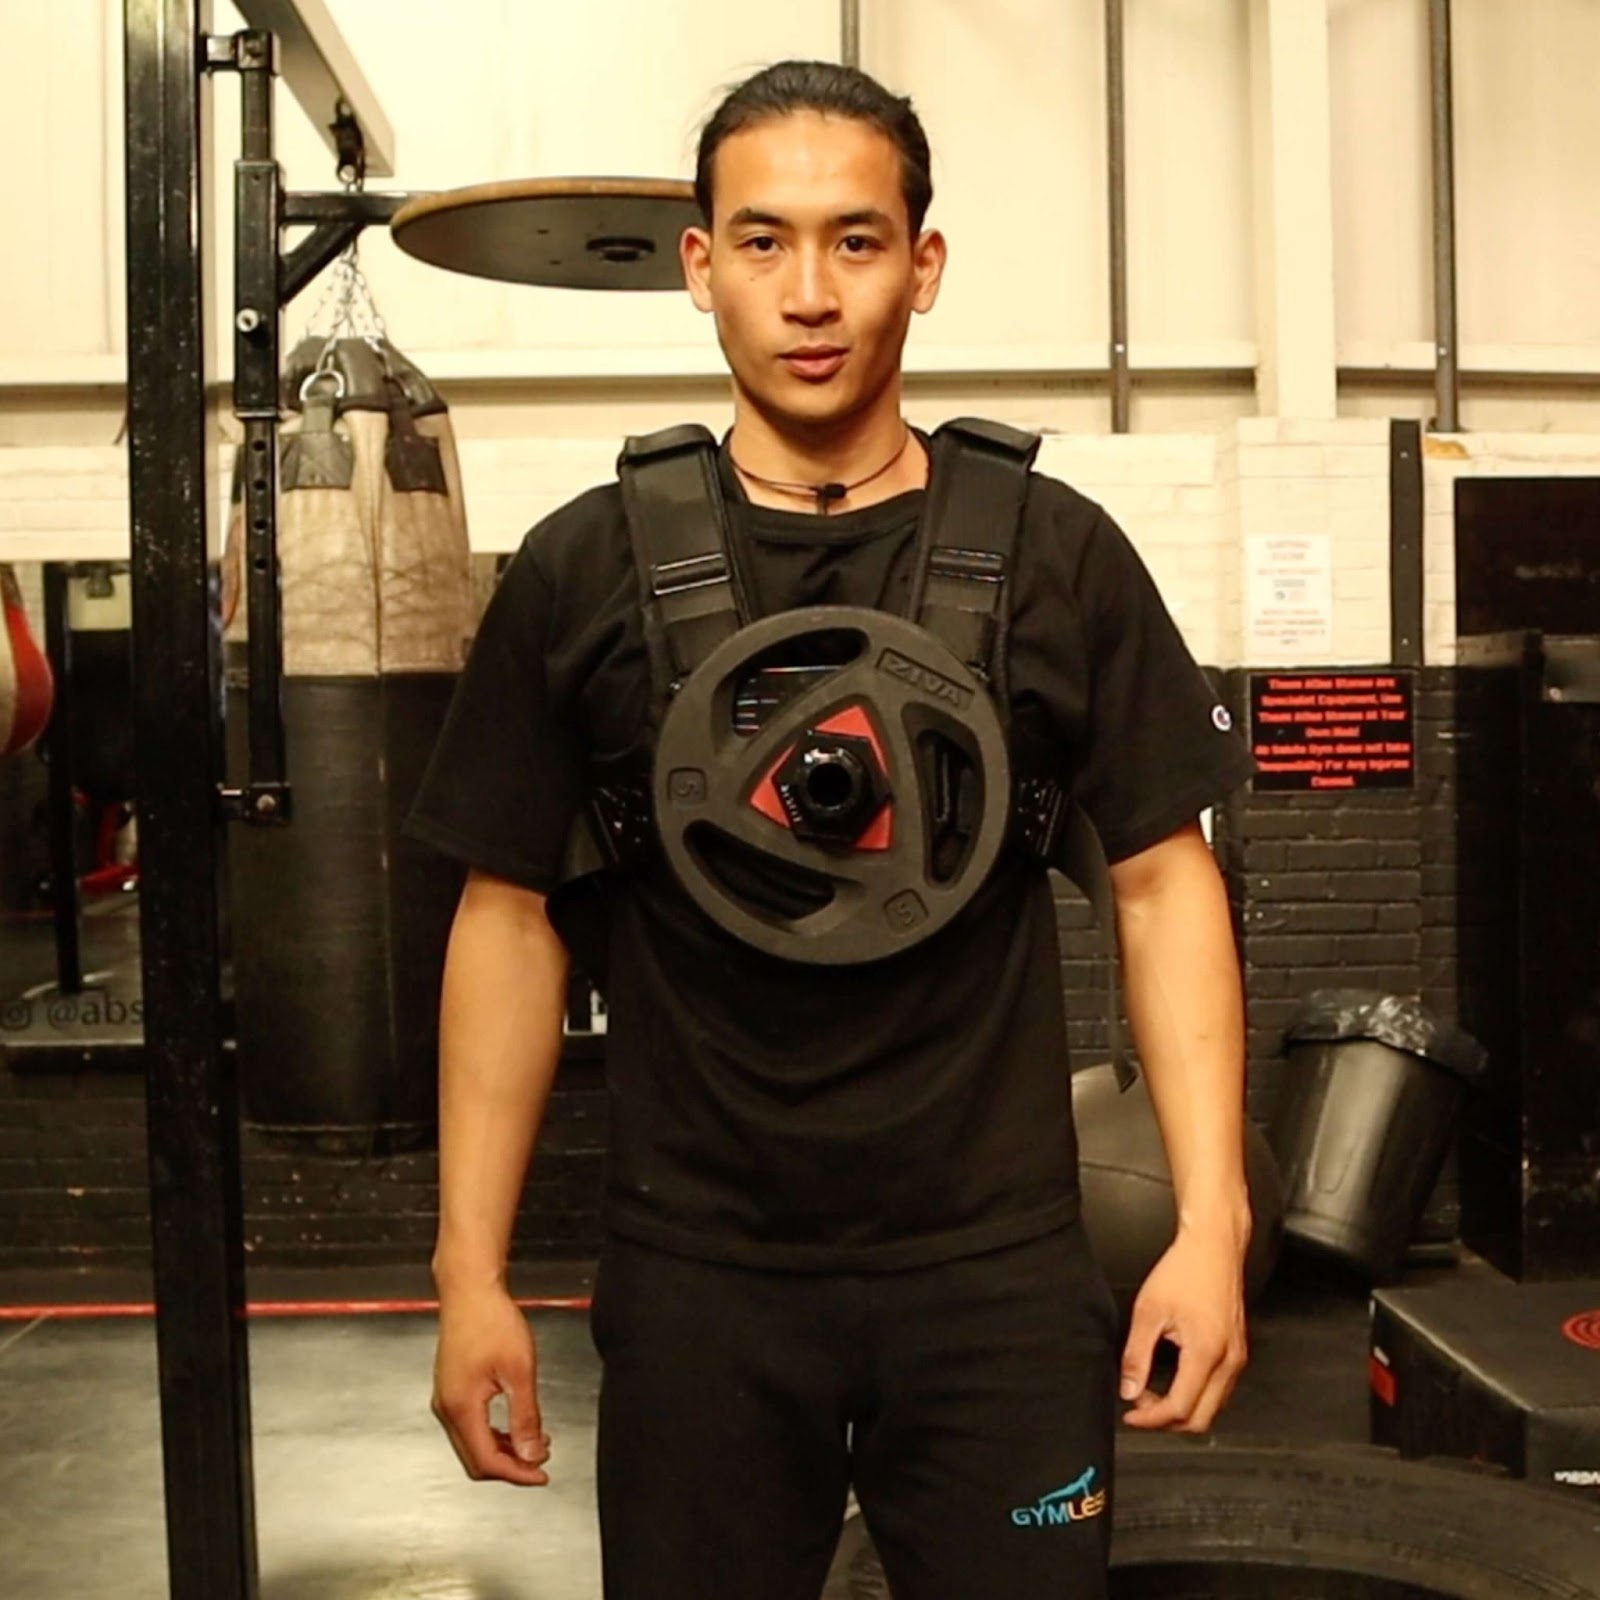 Kensui Vest: Is this the Best Weighted Vest? | Gymless